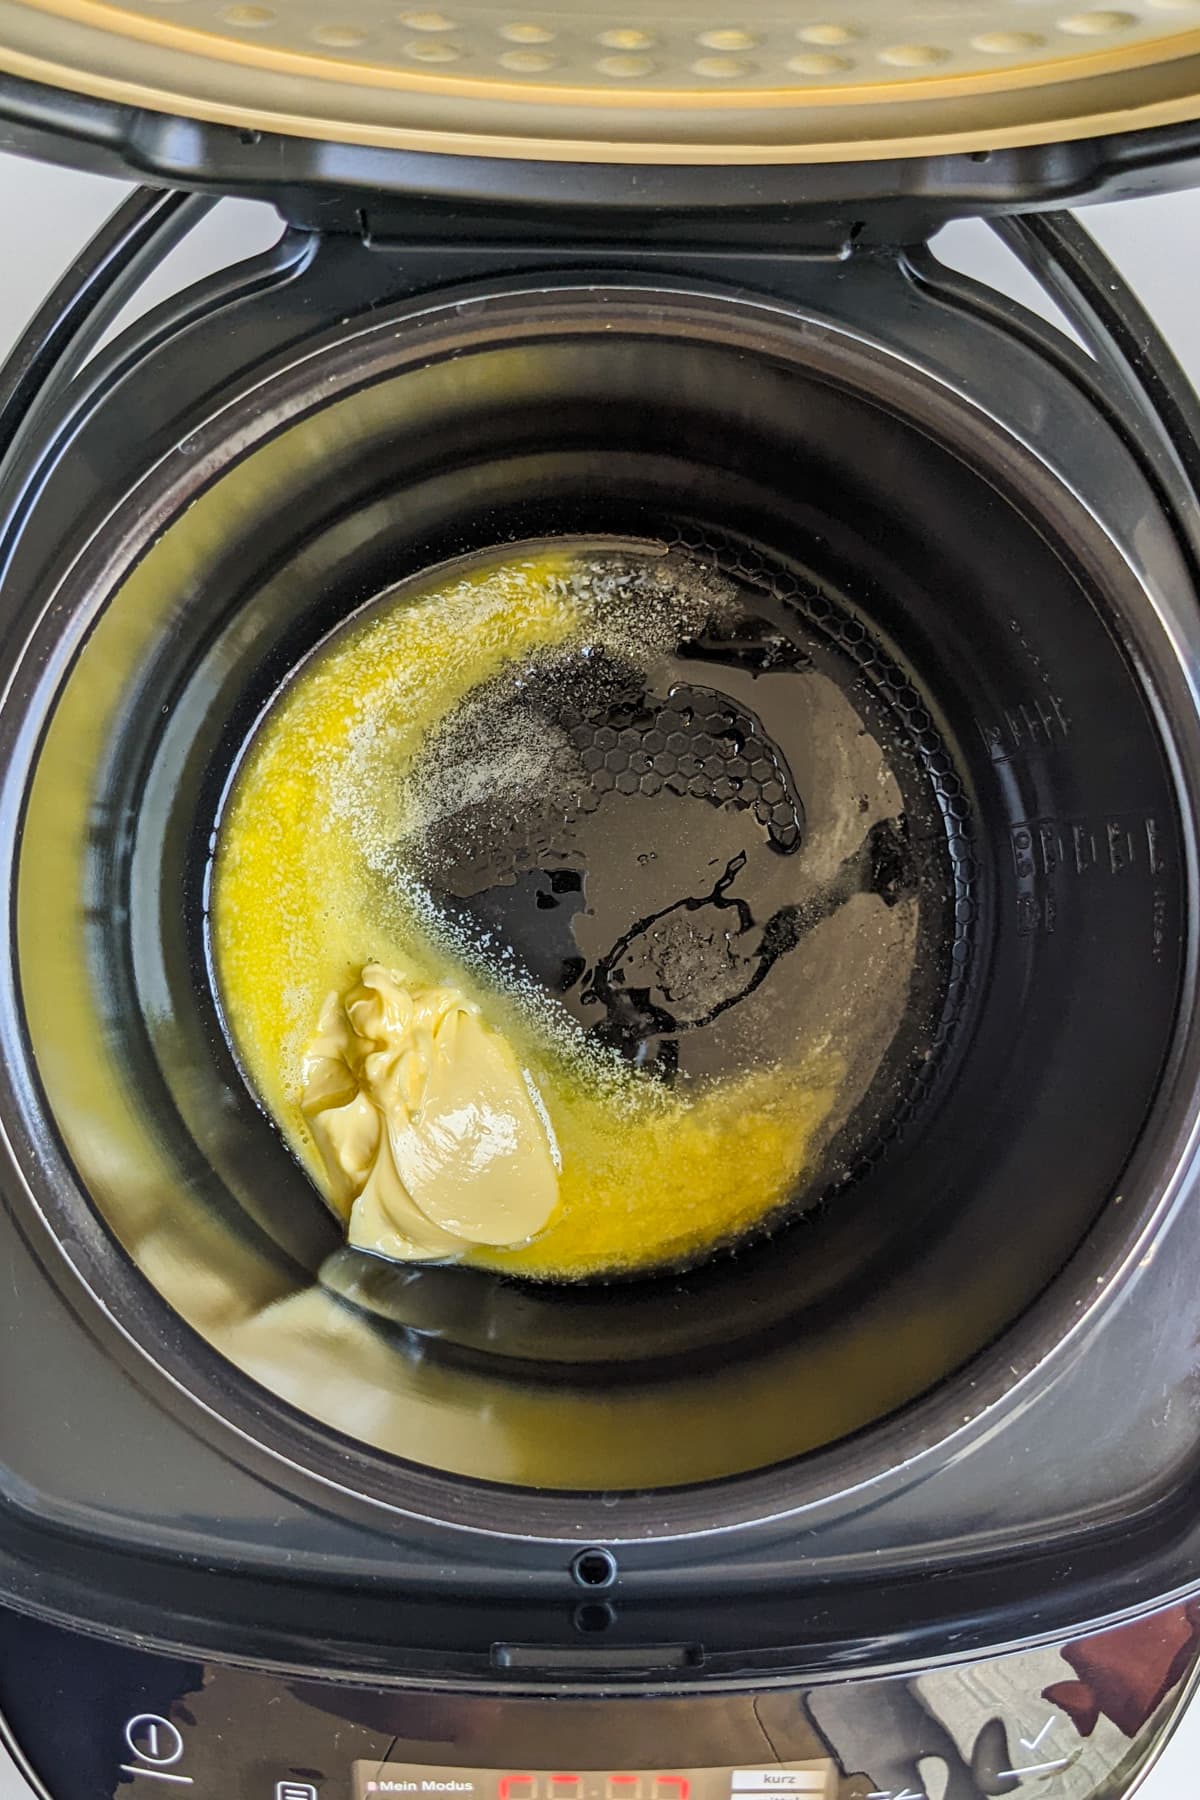 Top view of a slow cooker with a piece of butter and olive oil inside of it.